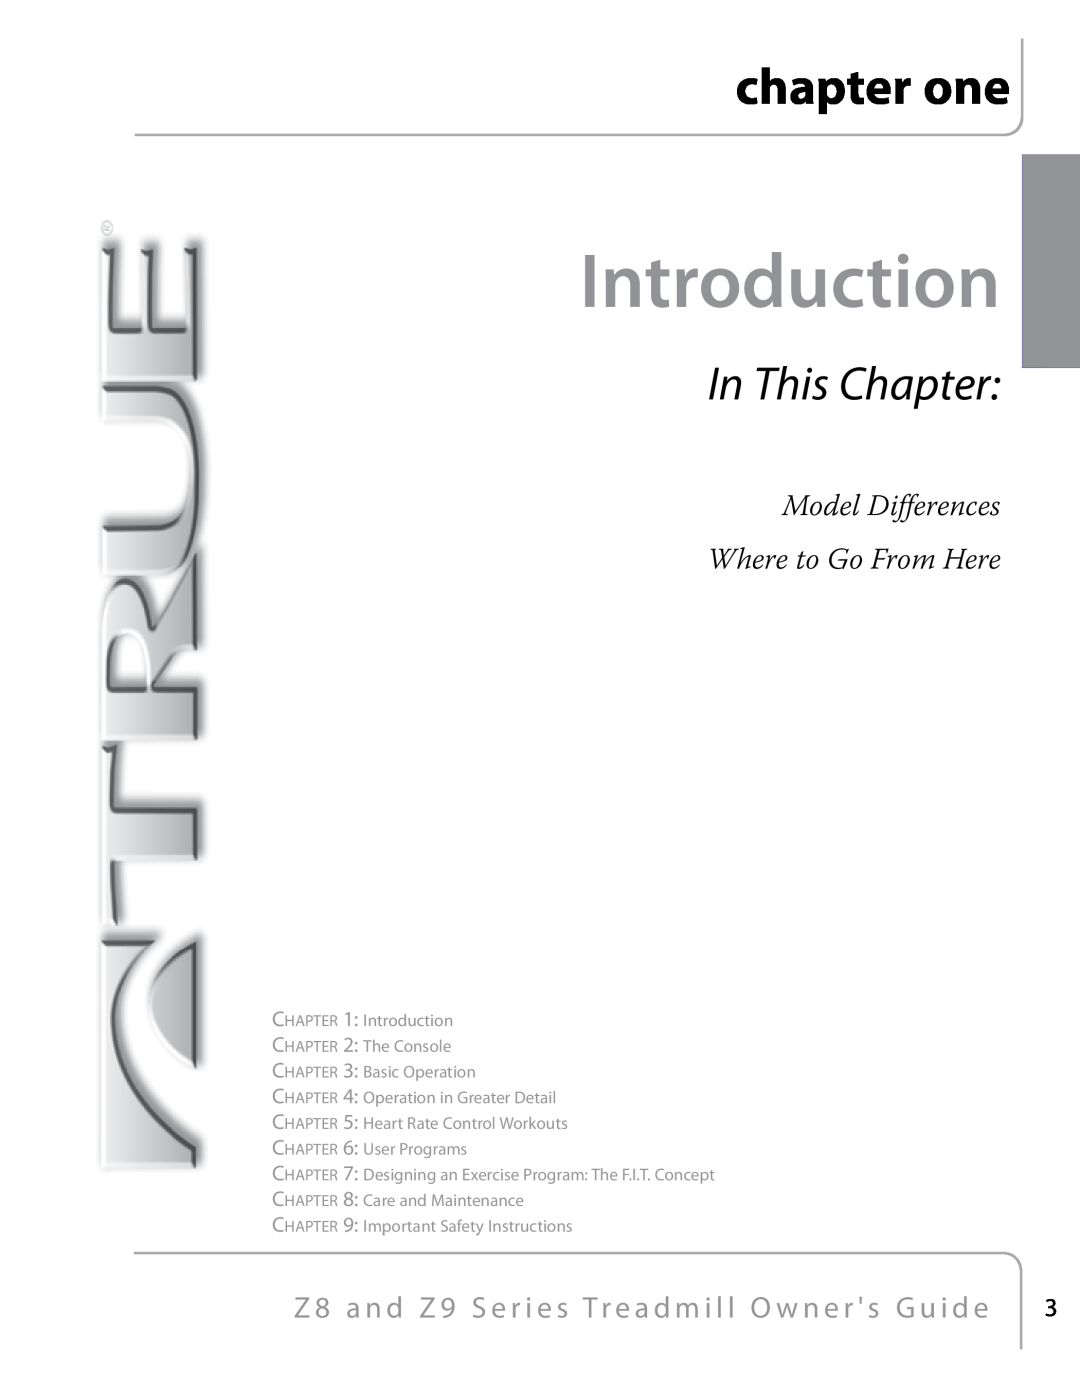 True Fitness Z9, Z8 manual chapter one, In This Chapter, Introduction 